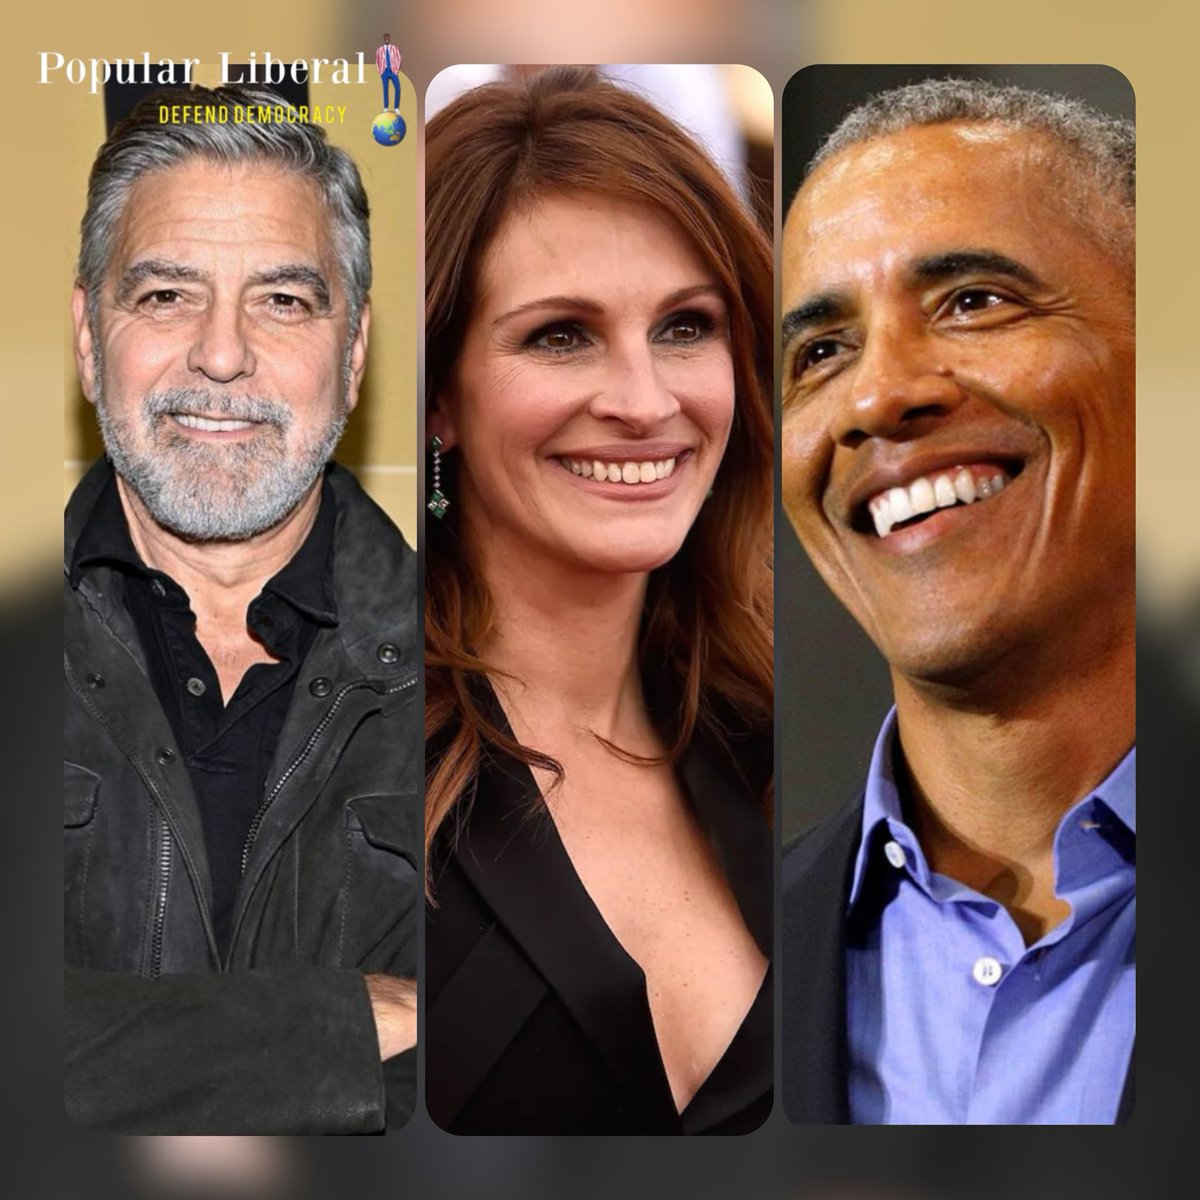 NEW JUST IN: George Clooney, Julia Roberts, and Barack Obama are set to be the main attractions at a dazzling fundraiser in Los Angeles to support the Biden campaign's fundraising efforts. Meanwhile, Donald Trump is reportedly making deals with Big Oil executives, offering to